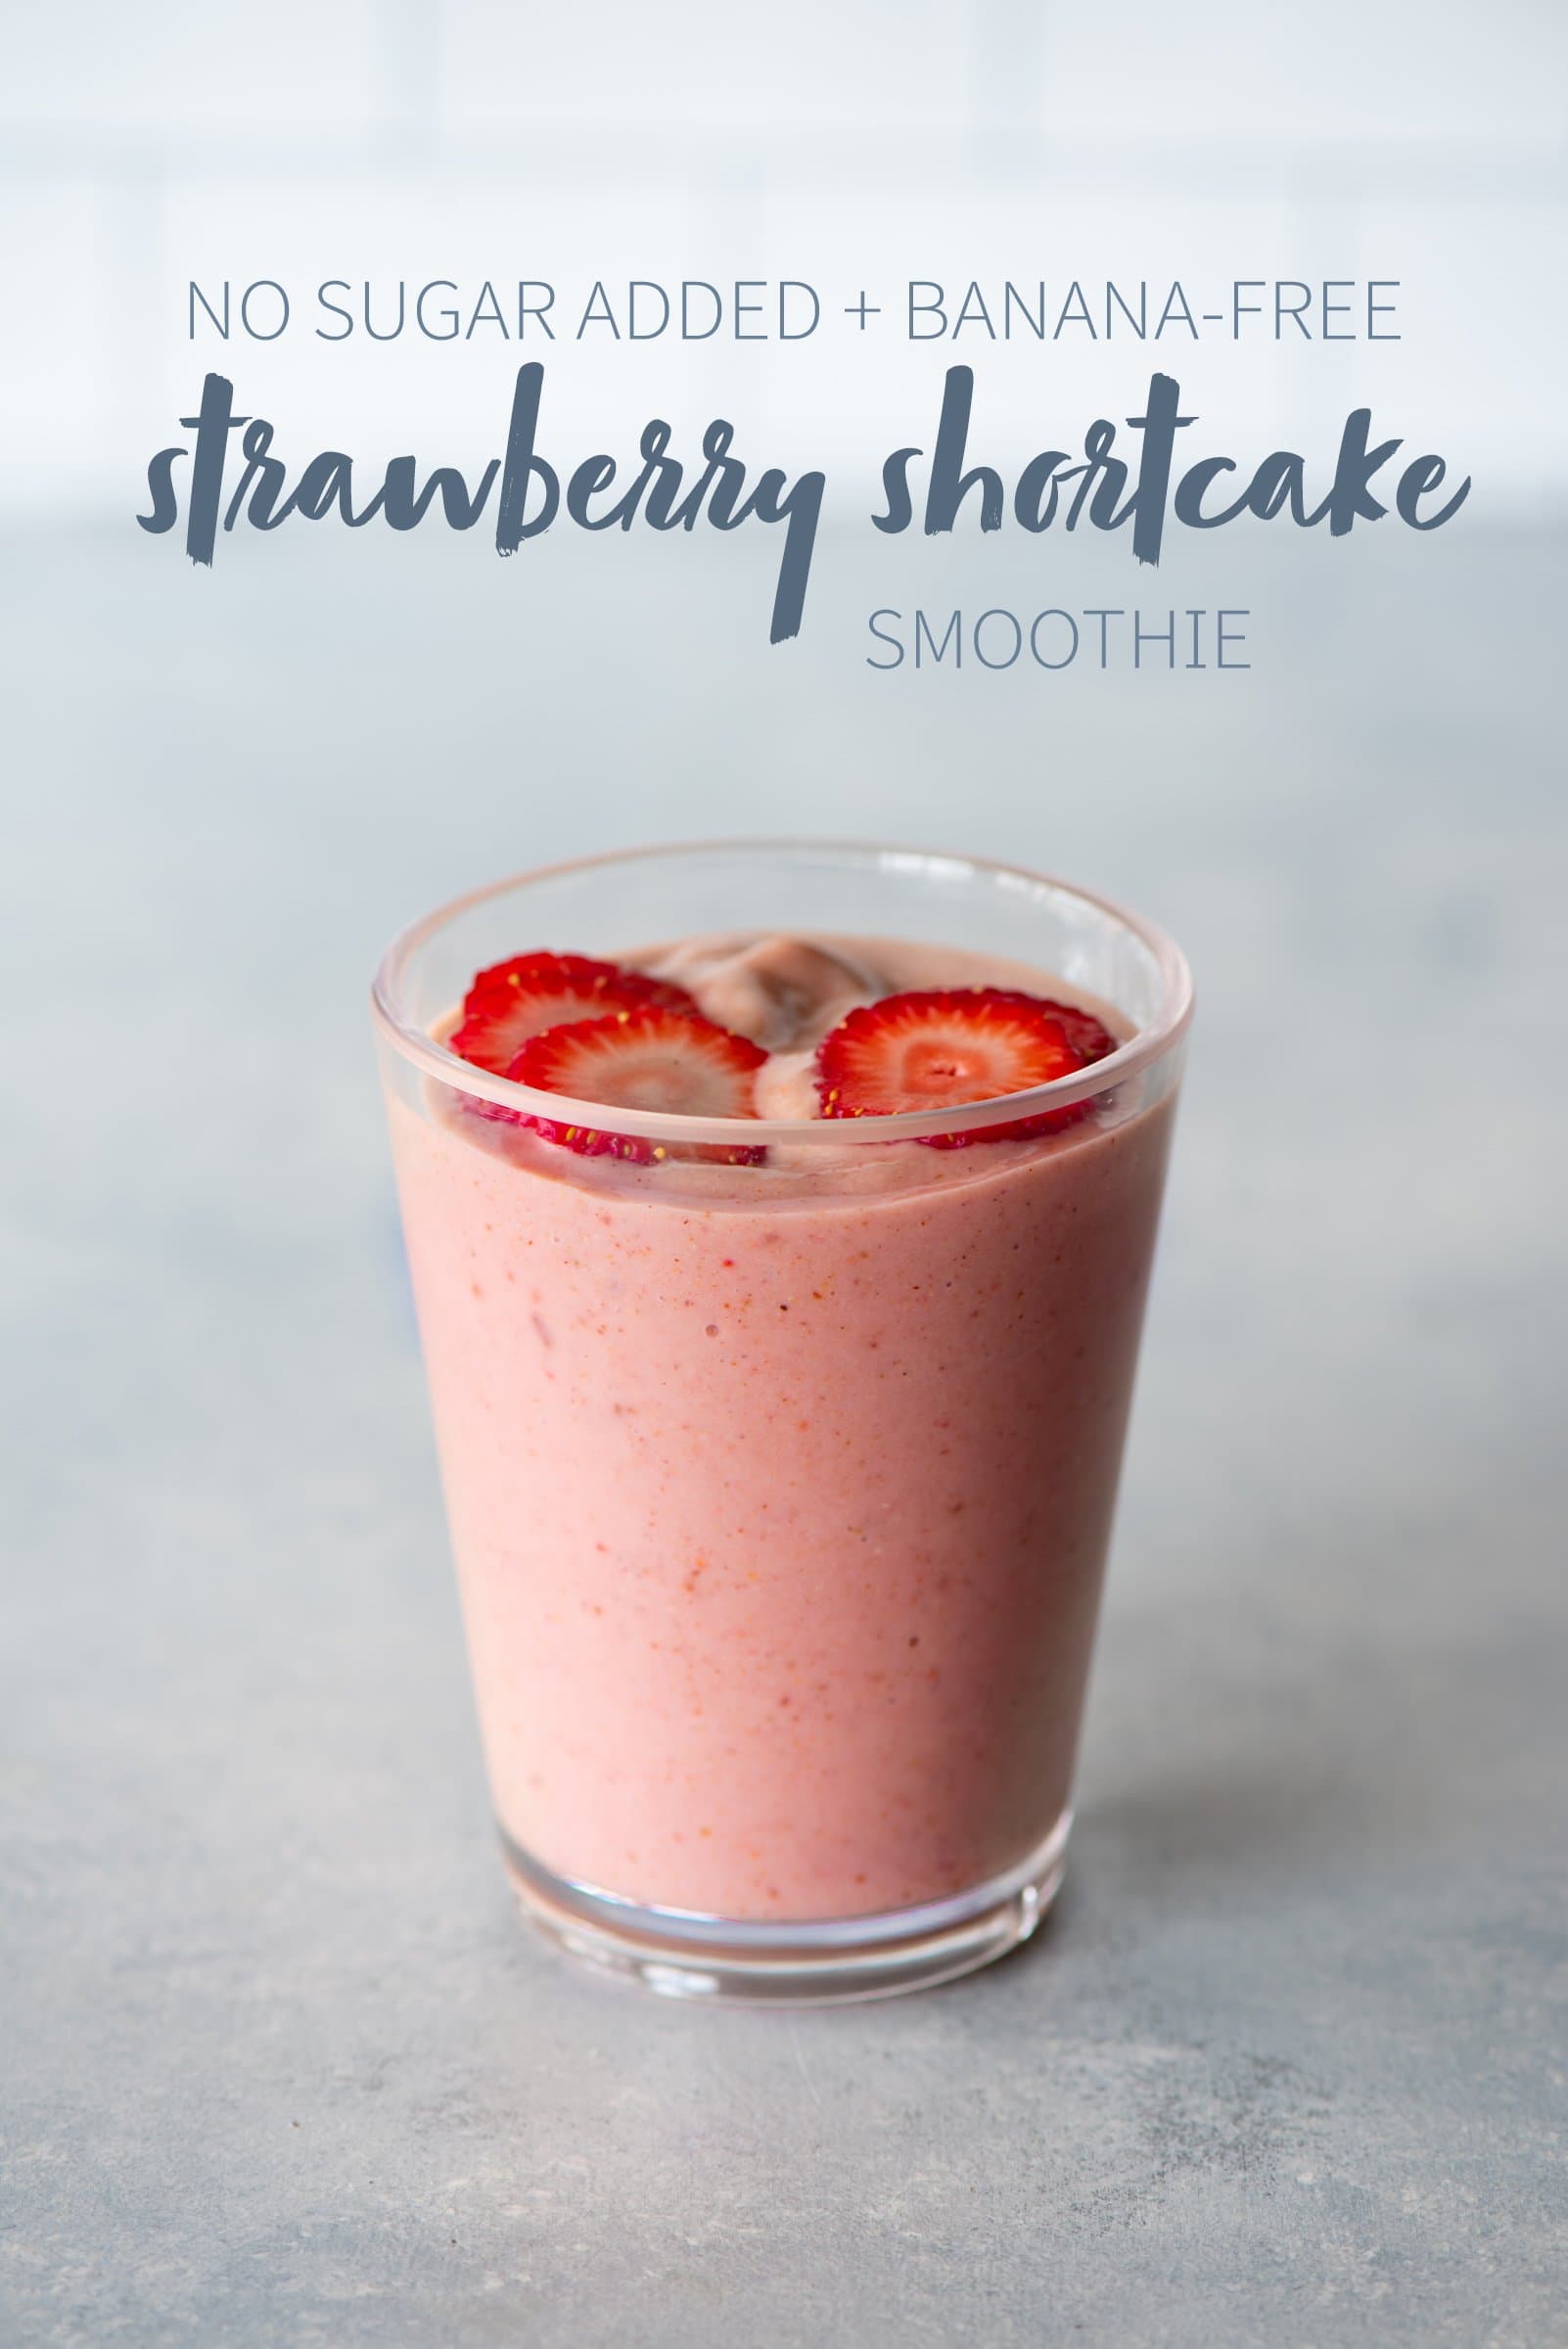 Strawberry shortcake smoothie in a clear glass topped with sliced strawberries. A text overlay reads "No Sugar Added + Banana-Free Strawberry Shortcake Smoothie."